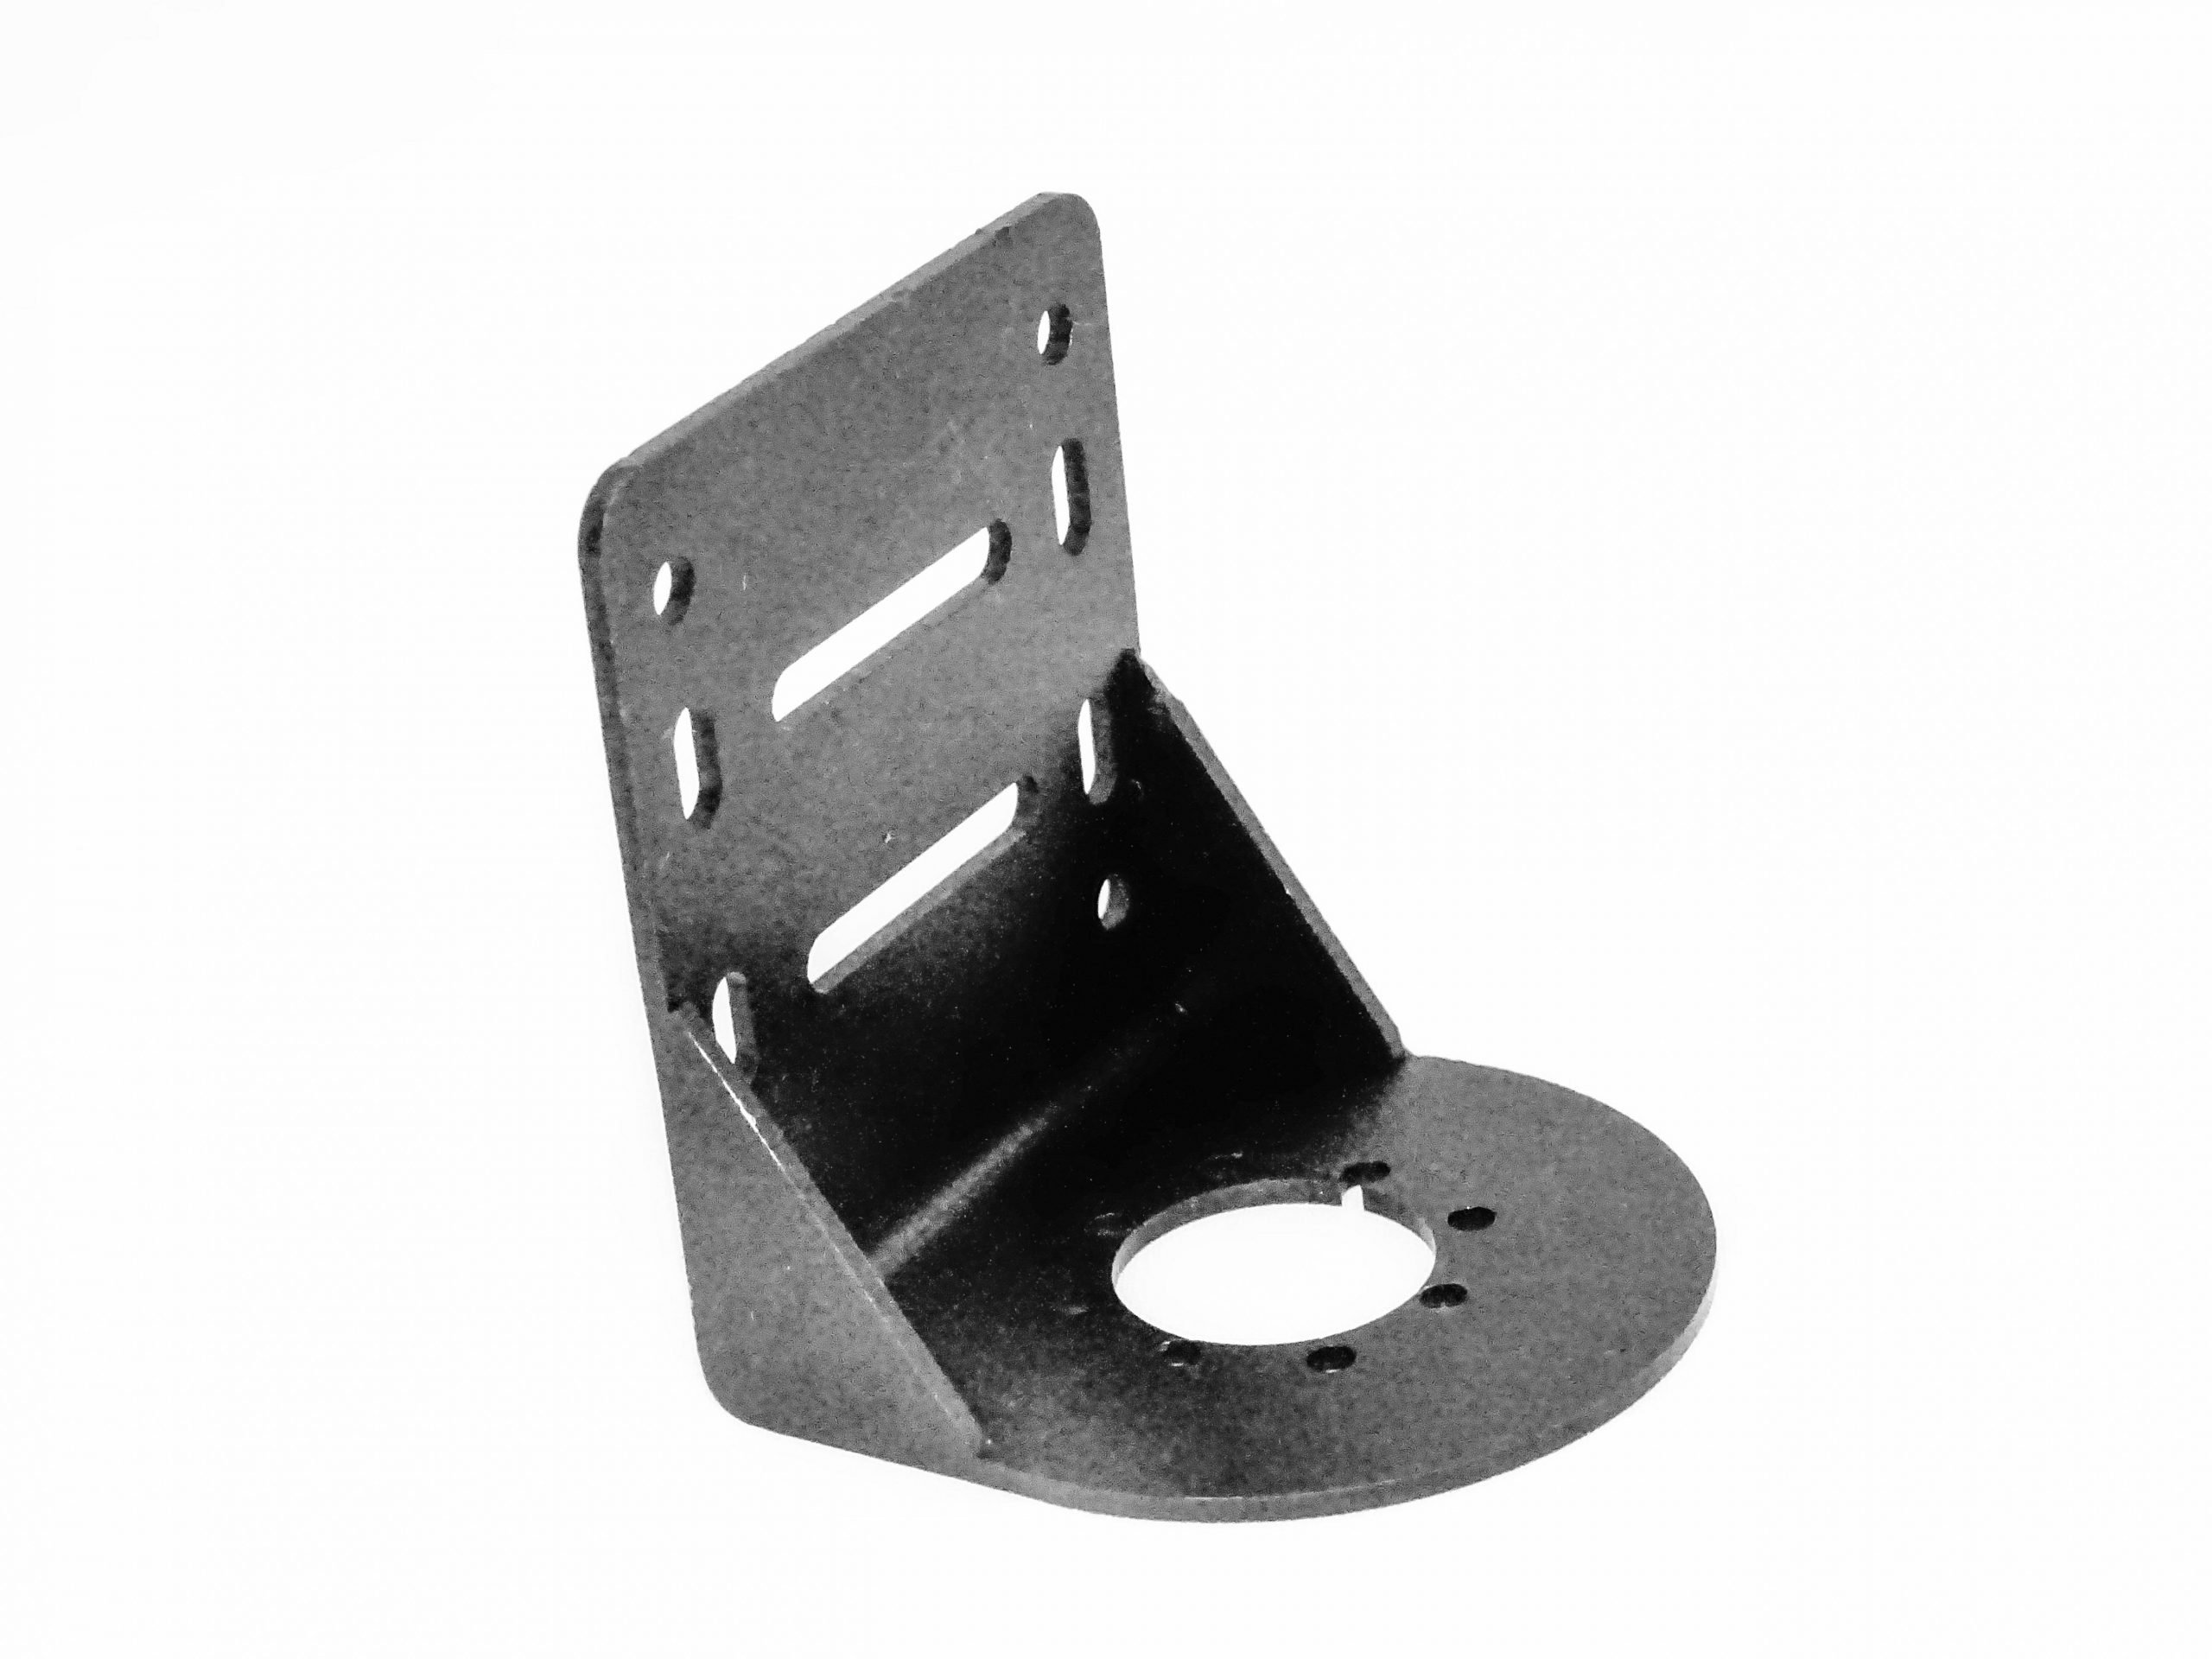 EasyMech Universal Bracket For HD and IG32 Planetary DC Geared Motor (Bend) - ROBU.IN